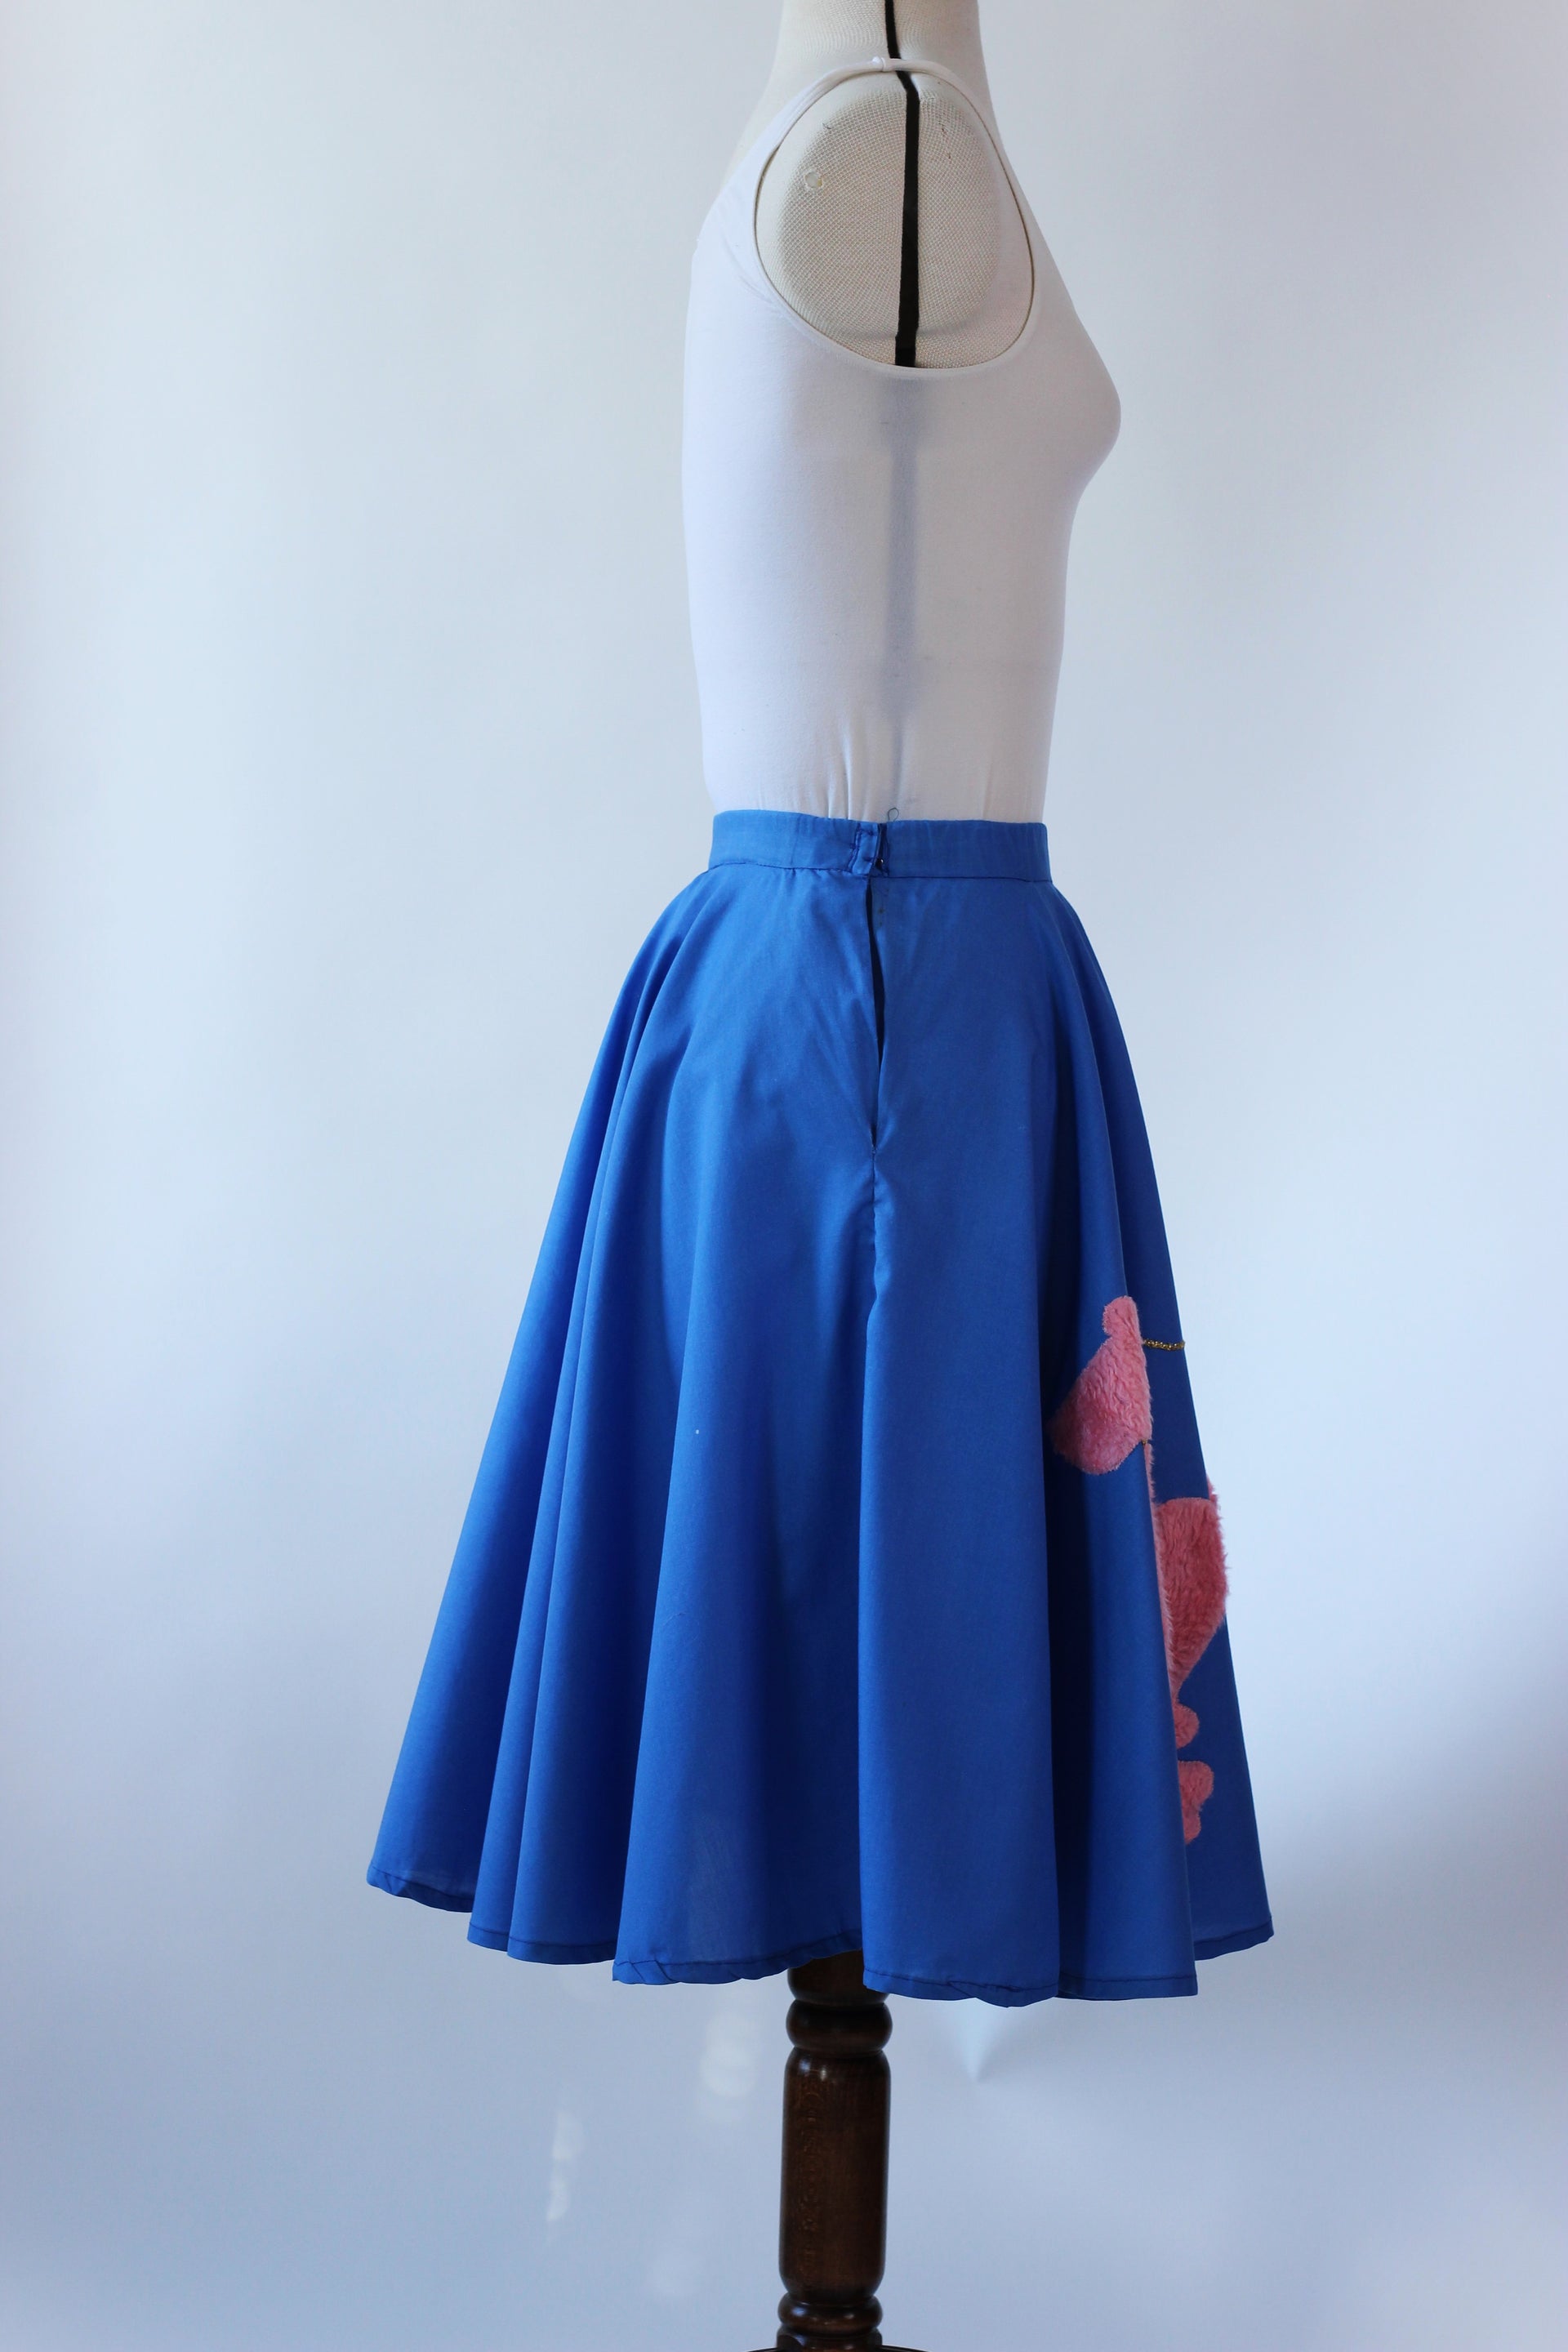 Handmade Blue Full Skirt with Pink Poodle//Size XS/S